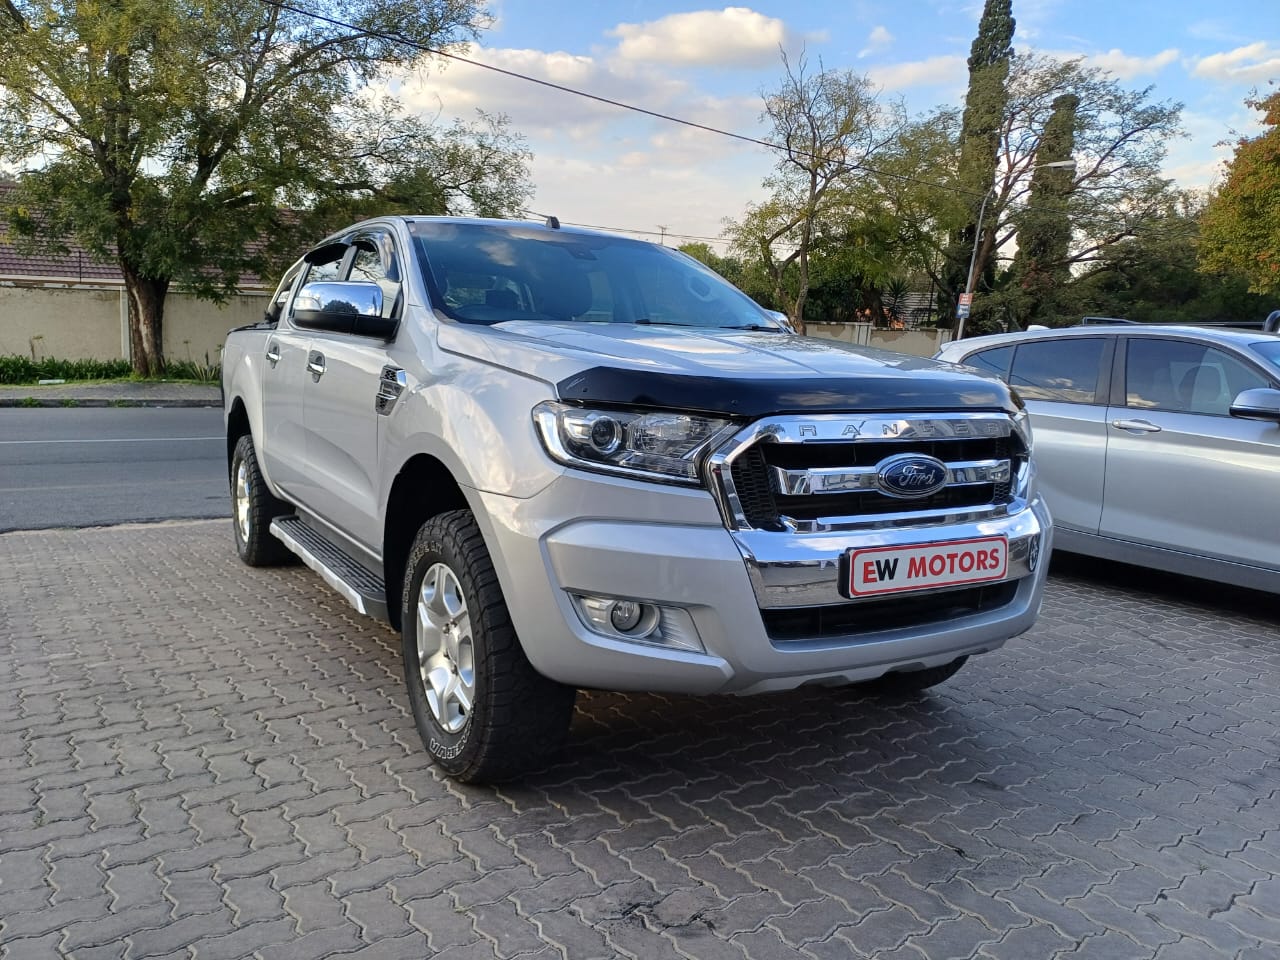 2017 Ford Ranger 2.2TDCi Double Cab Hi-Rider XLT For Sale